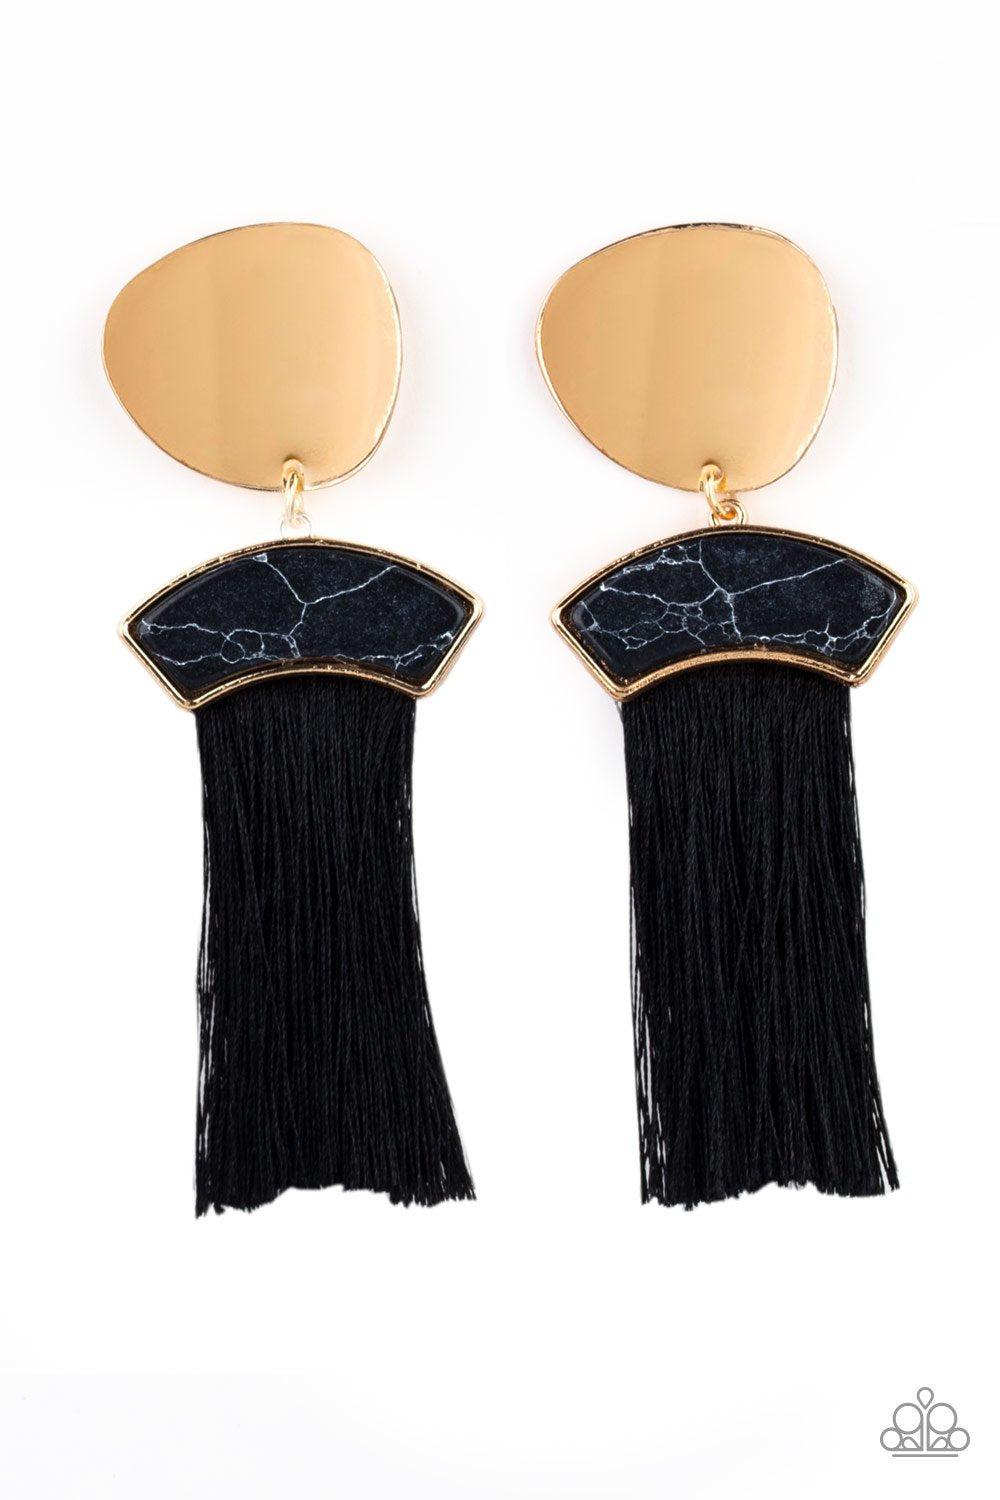 Insta Inca Black and Gold Tassel Earrings - Paparazzi Accessories-CarasShop.com - $5 Jewelry by Cara Jewels